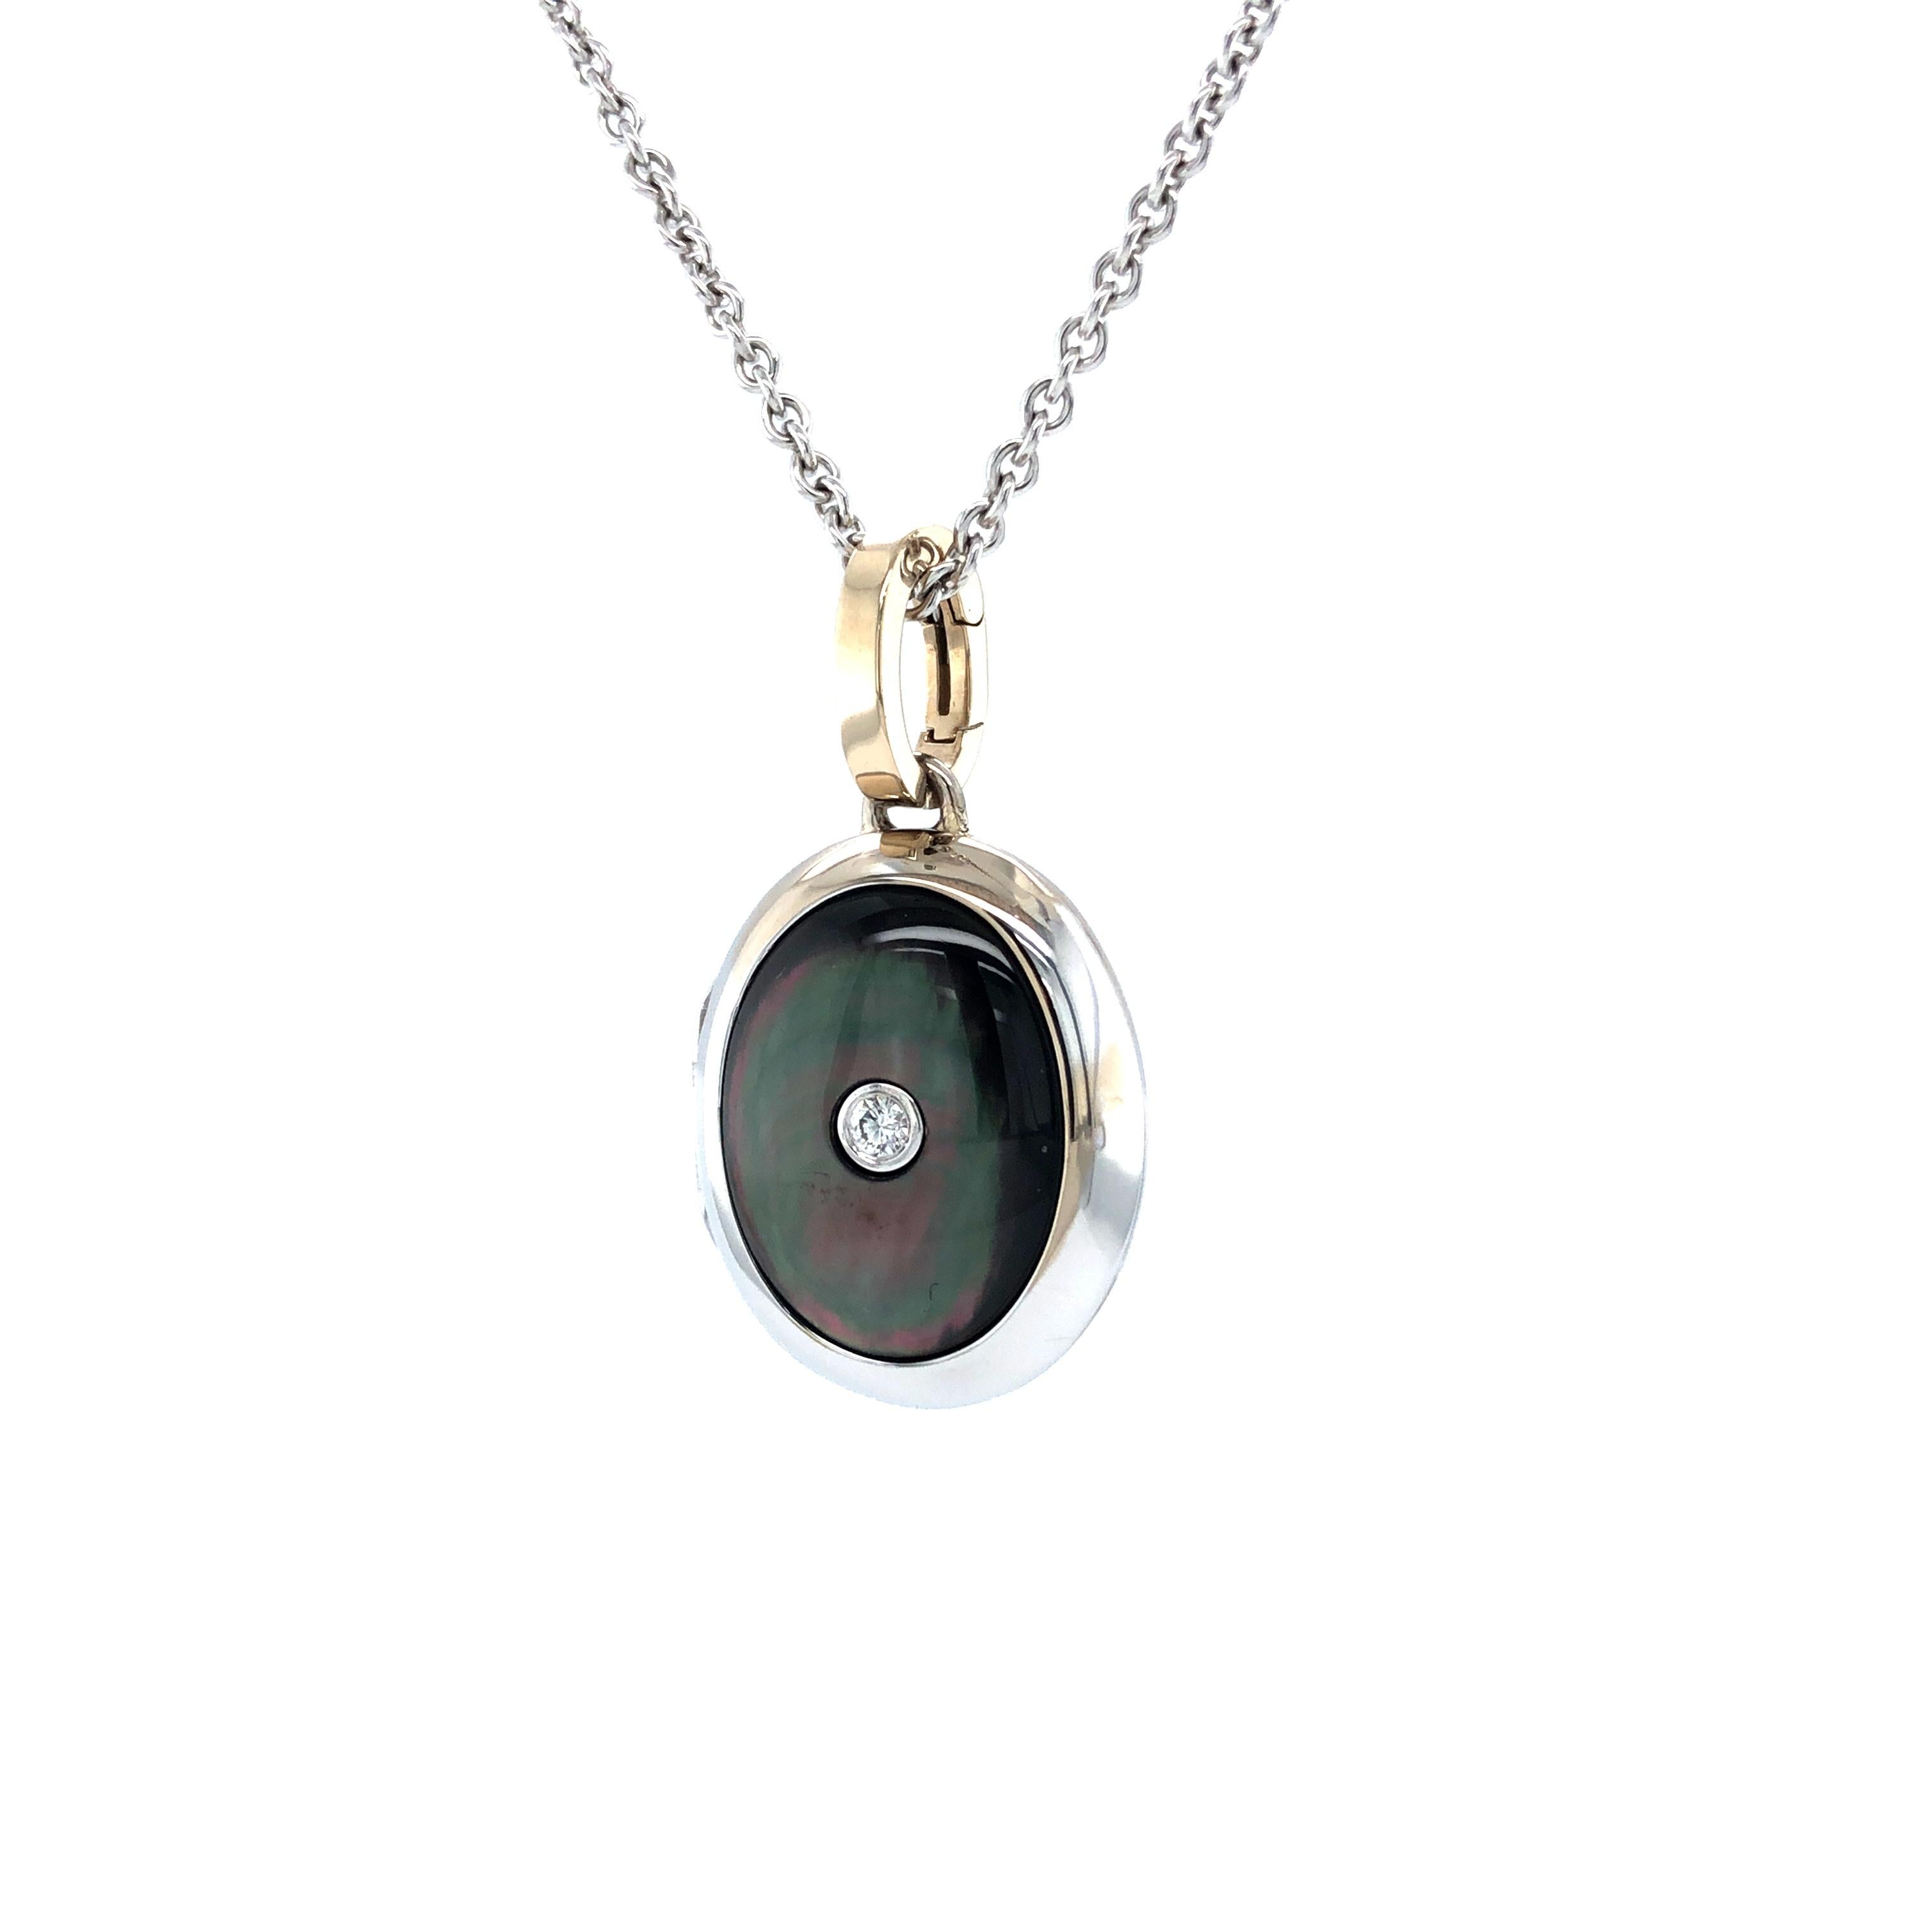 Victor Mayer oval pendant locket necklace 18k white gold, 1 diamond, total 0.04 ct, H VS brilliant cut, 1 black mother of pearl inlay

About the creator Victor Mayer
Victor Mayer is internationally renowned for elegant timeless designs and